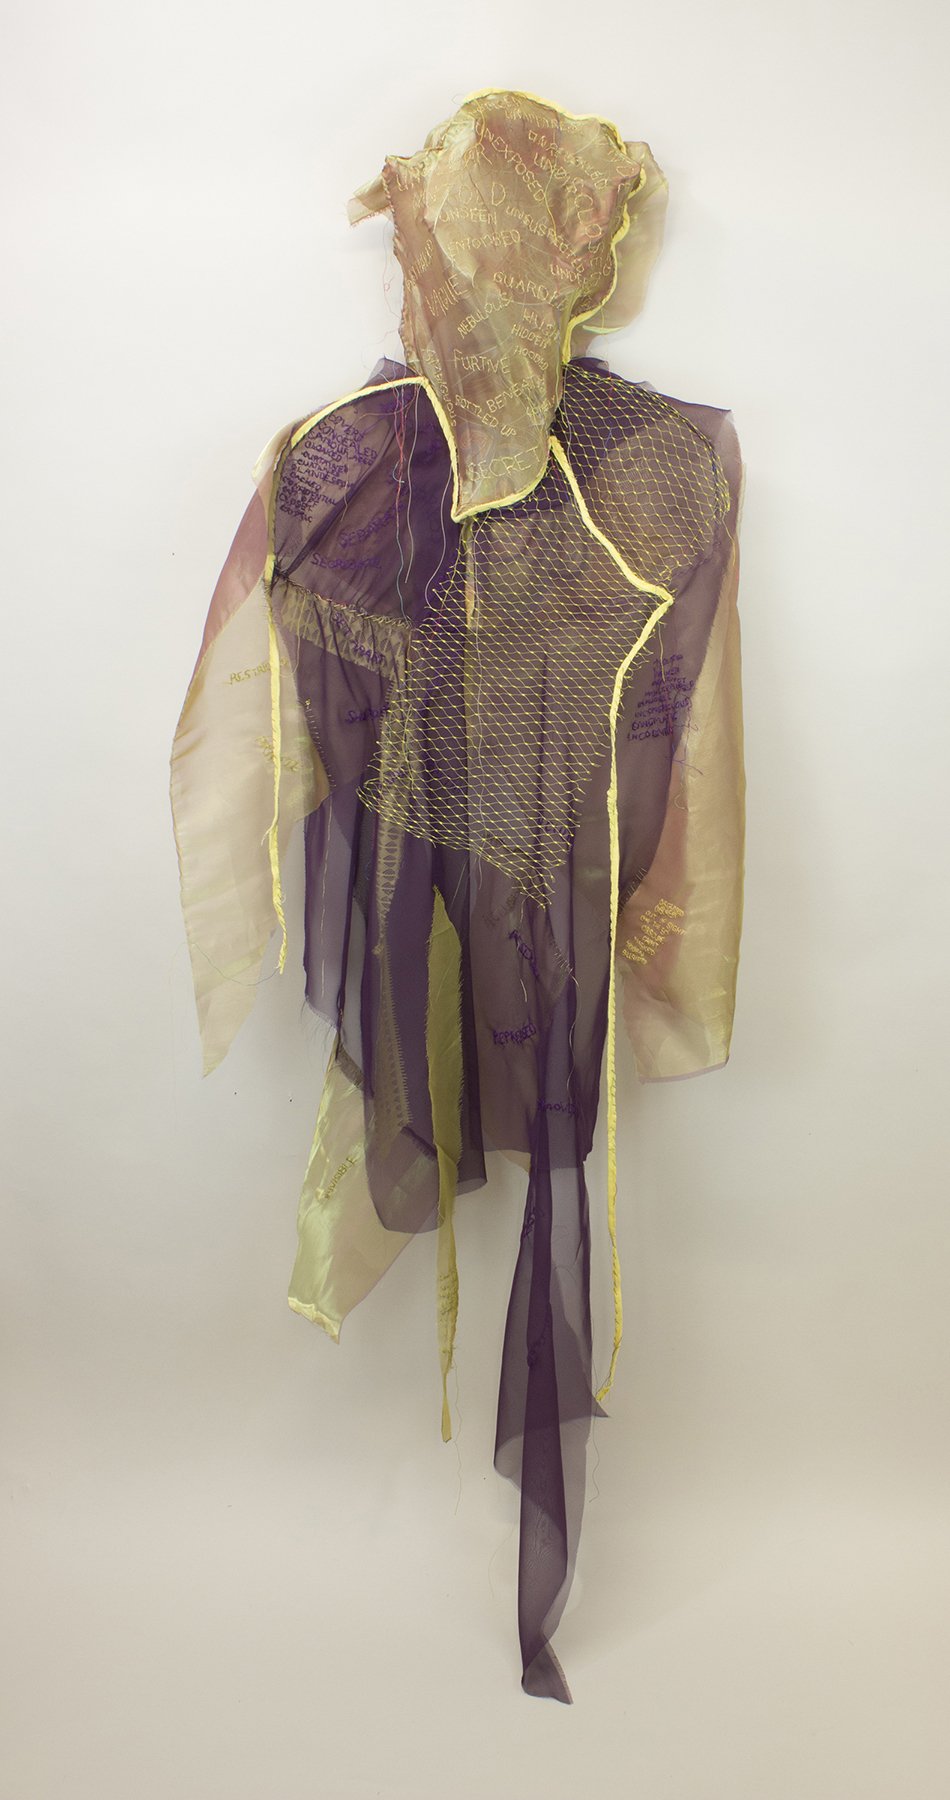    Invisible    crushed and reclaimed old work (steel), reclaimed food net and fabric, paper, thread, steel, 70 x 23 x 7 inches                 